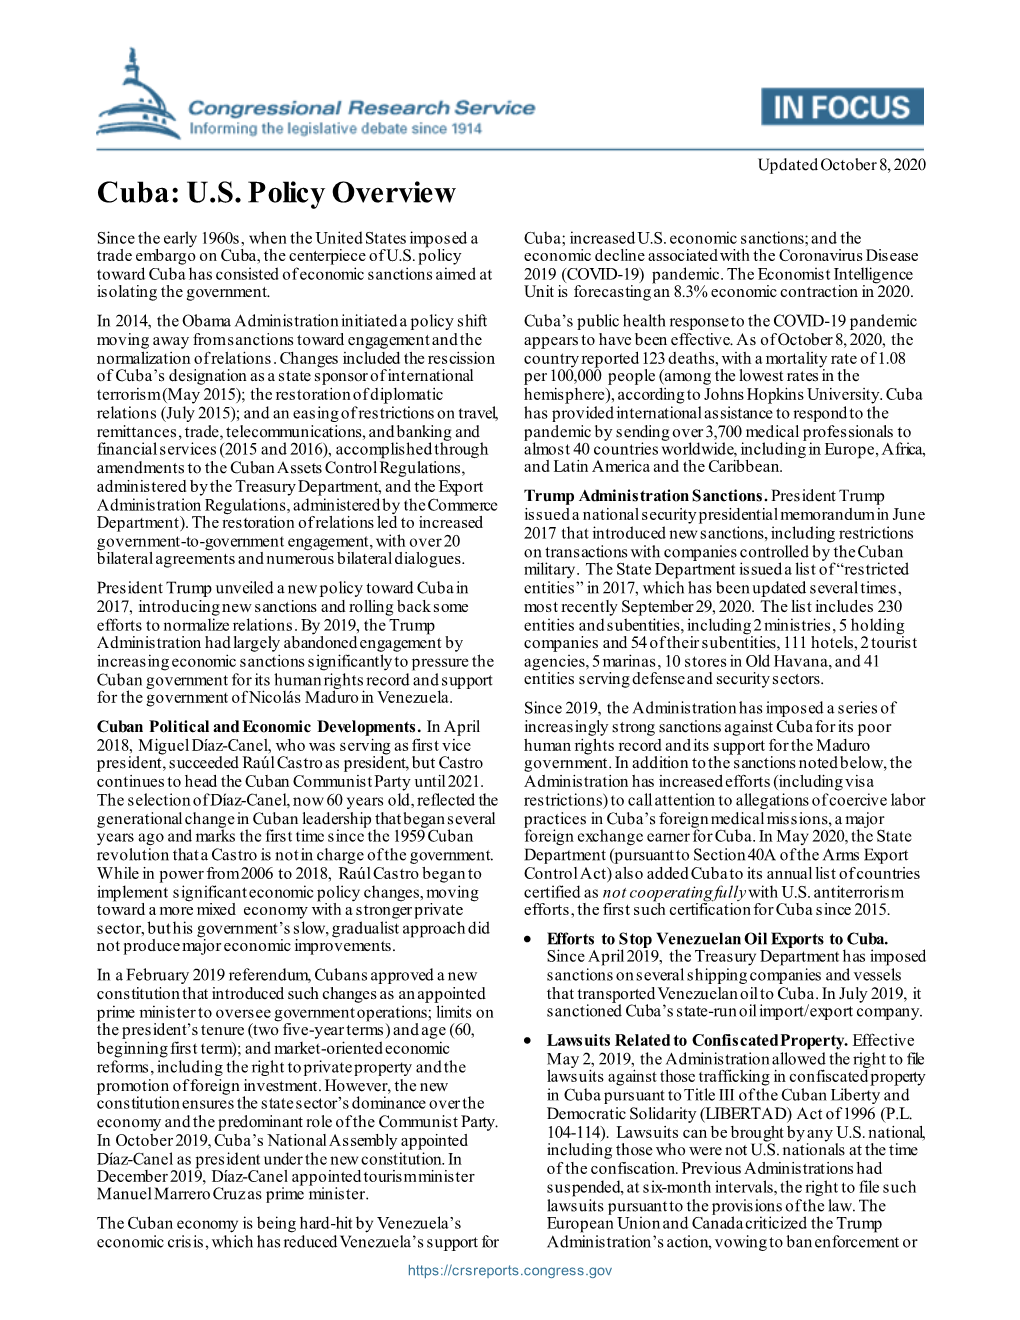 Cuba: U.S. Policy Overview